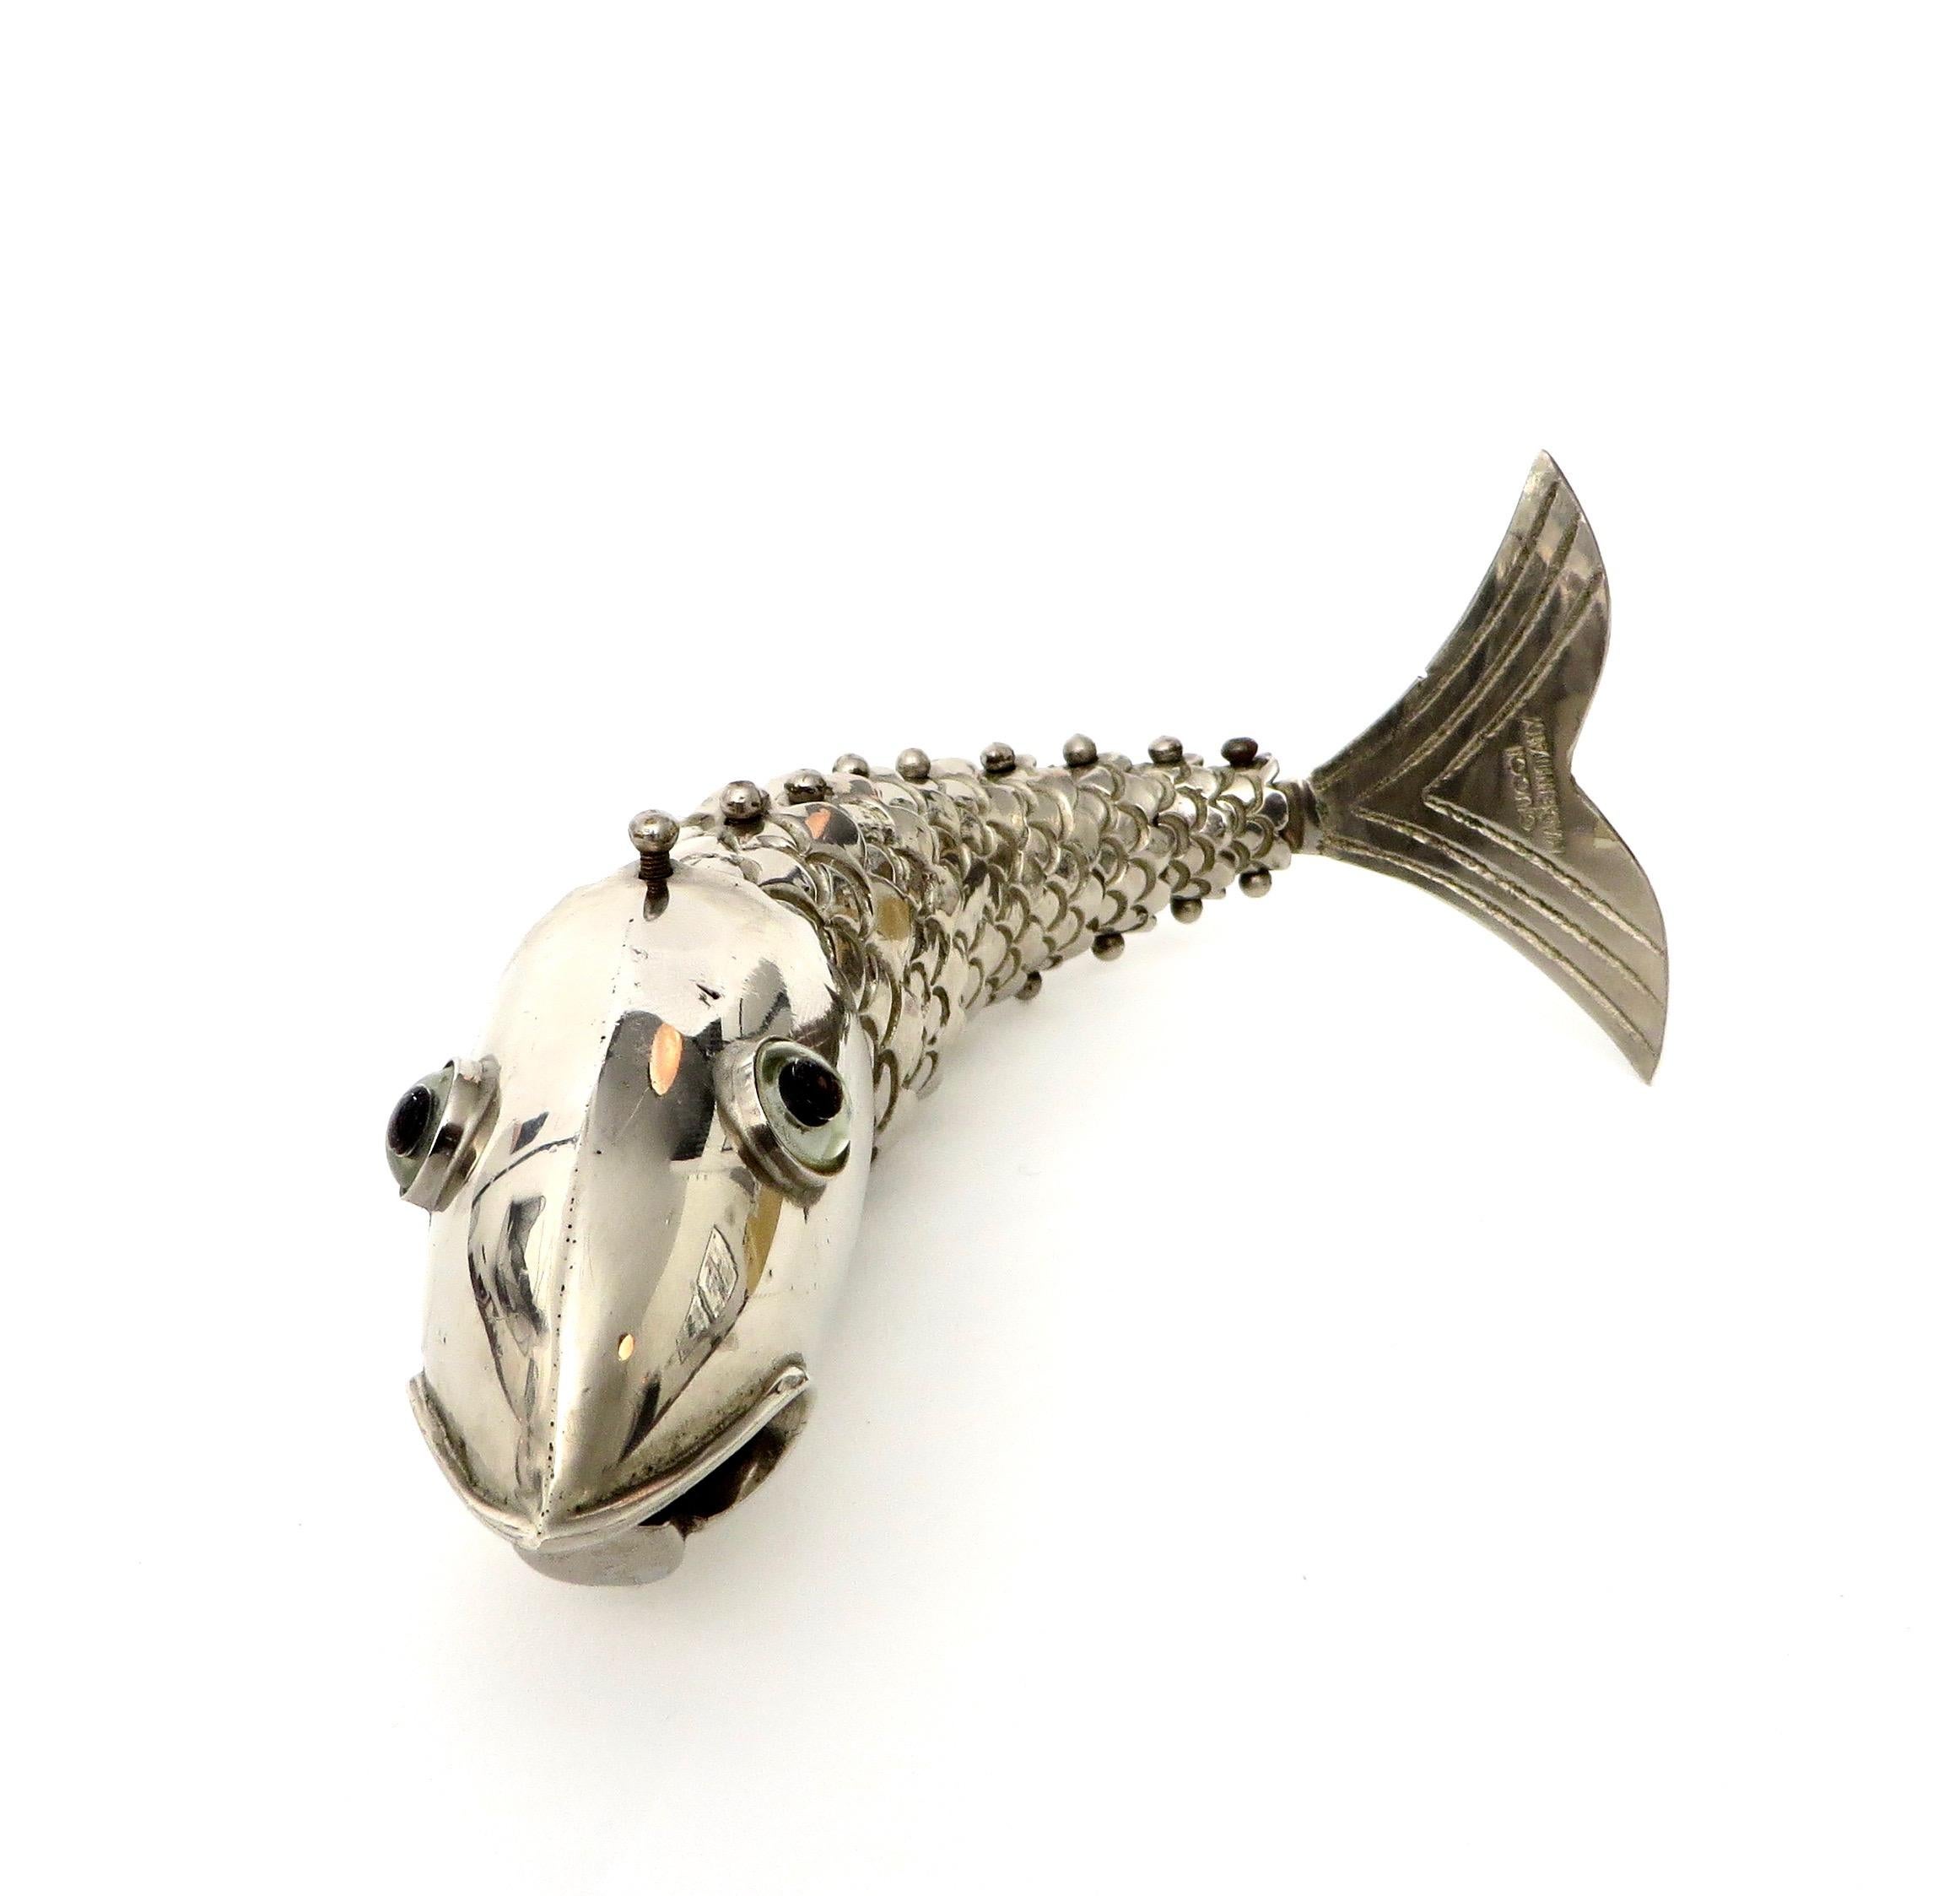 Mid-Century Modern Silver Plate Gucci Made in Italy Bottle Opener in the Form of a Fish